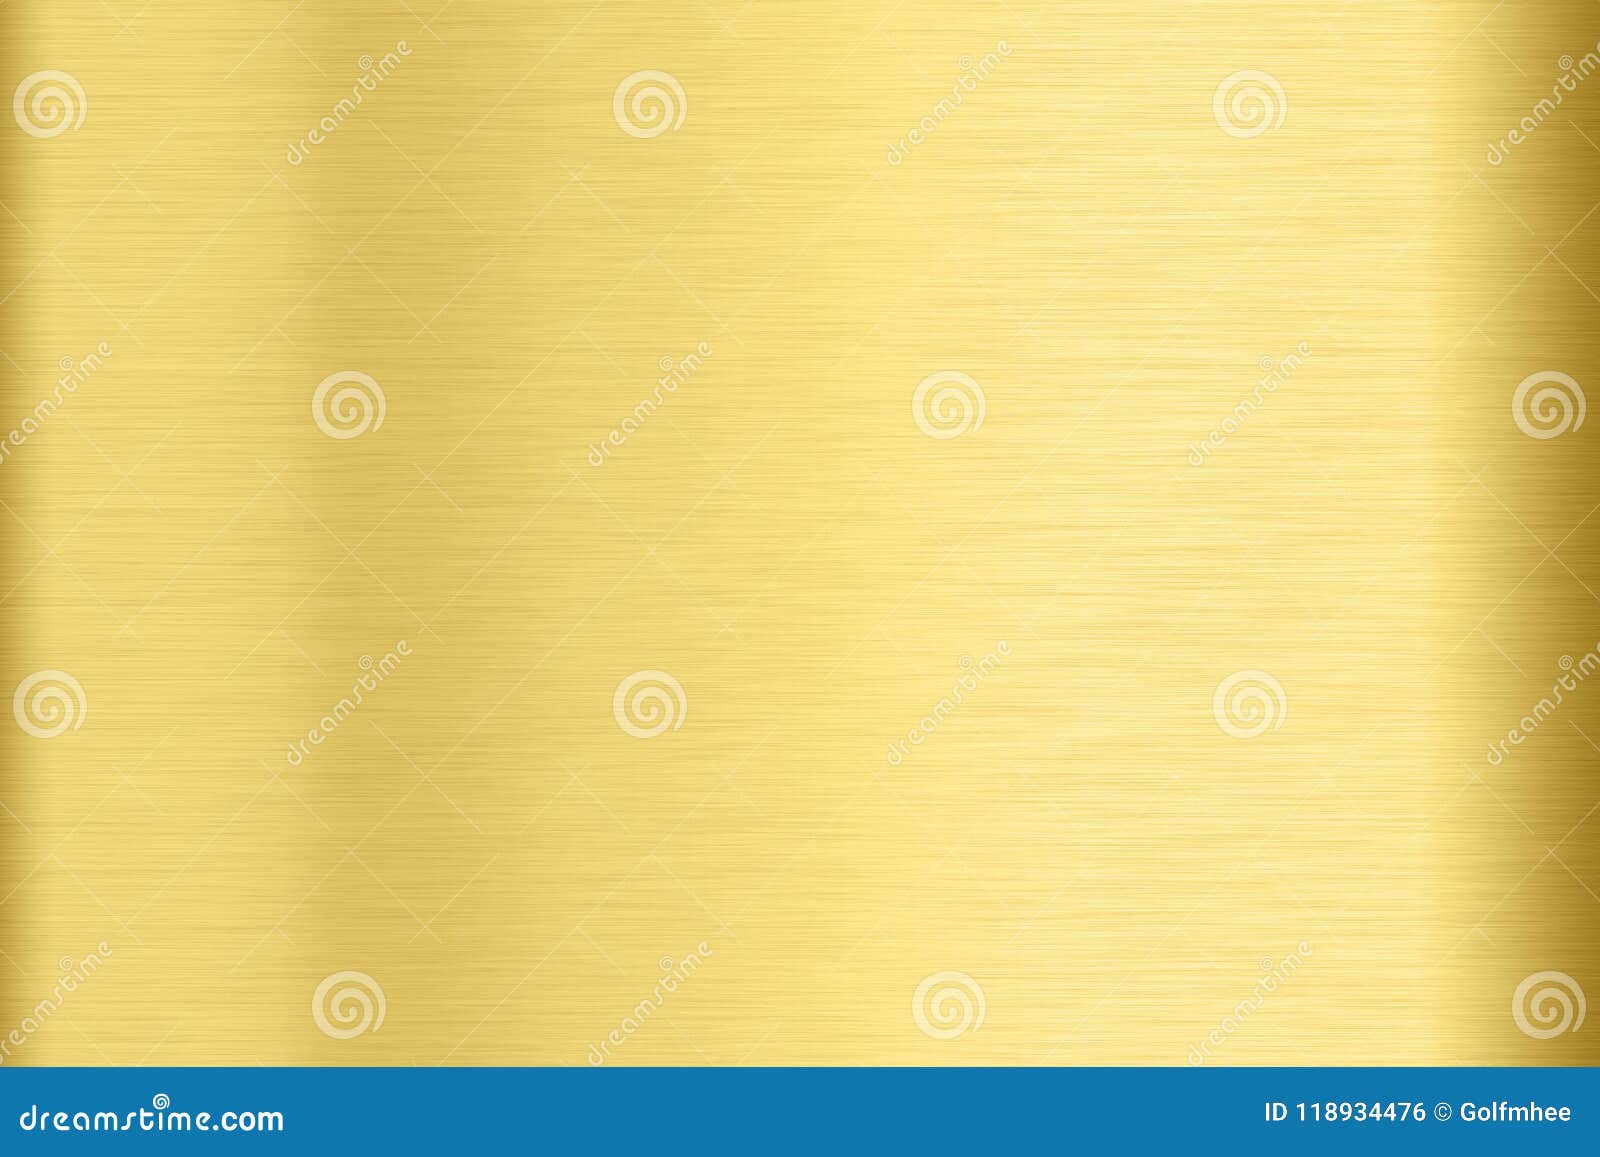 abstract shiny smooth foil metal gold color background bright vi